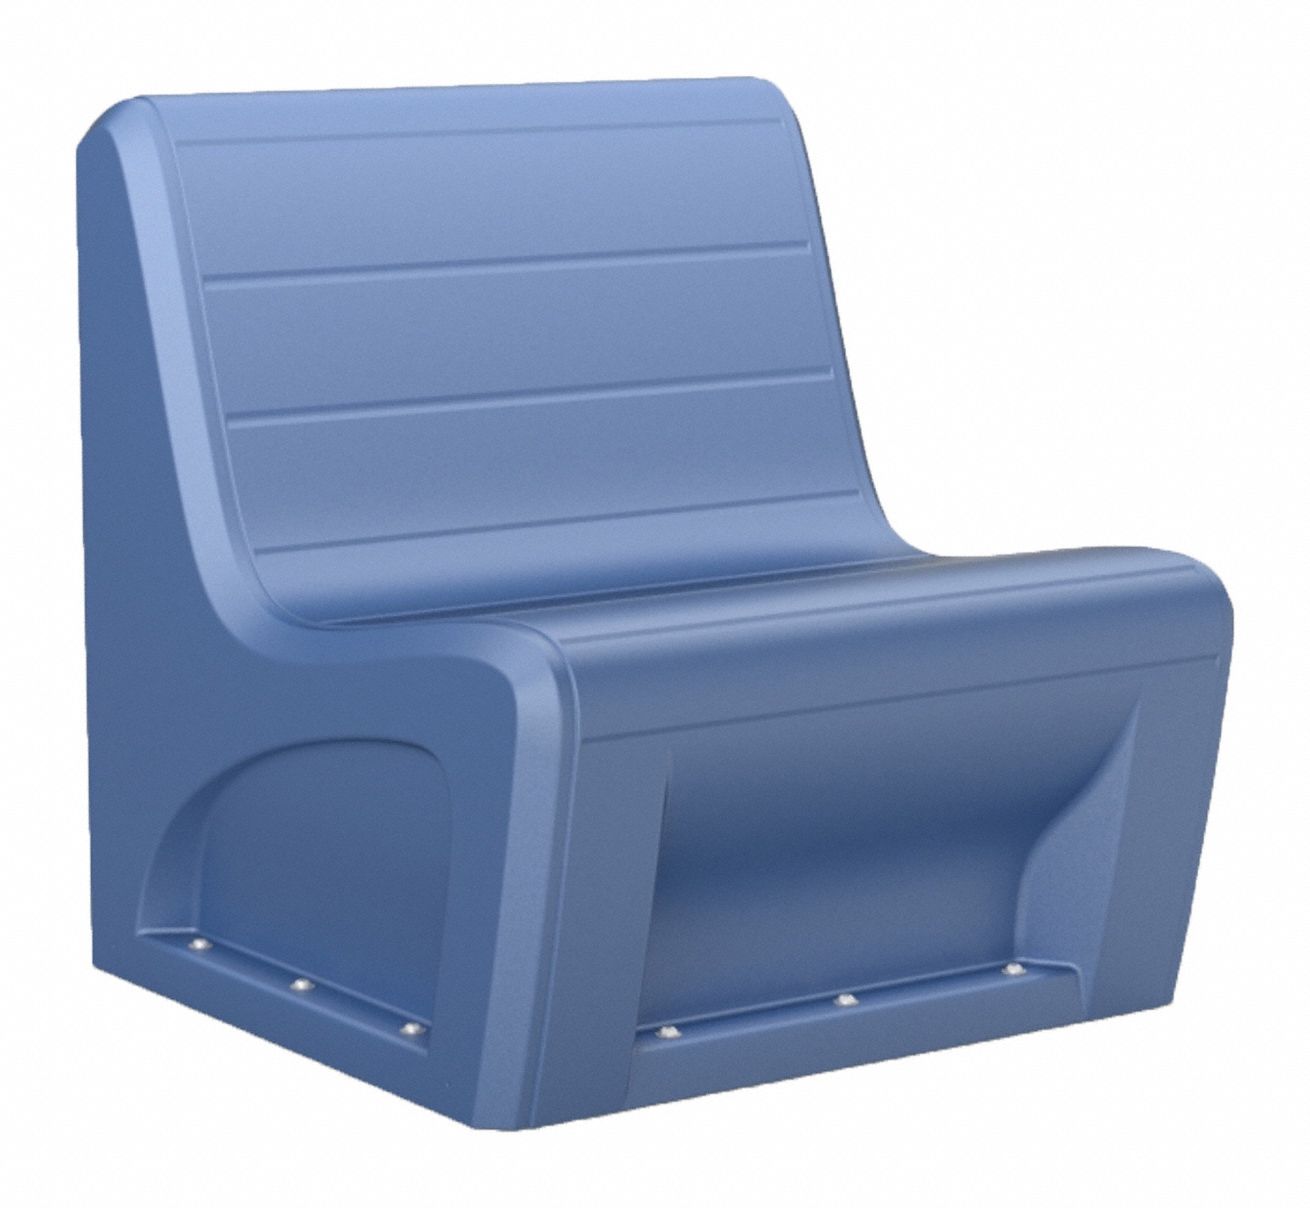 Sabre Sectional Chair w/Sand Port Midnight Blue: 30 1/2 in Wd, 32 in Lg, 33 in Ht, Blue